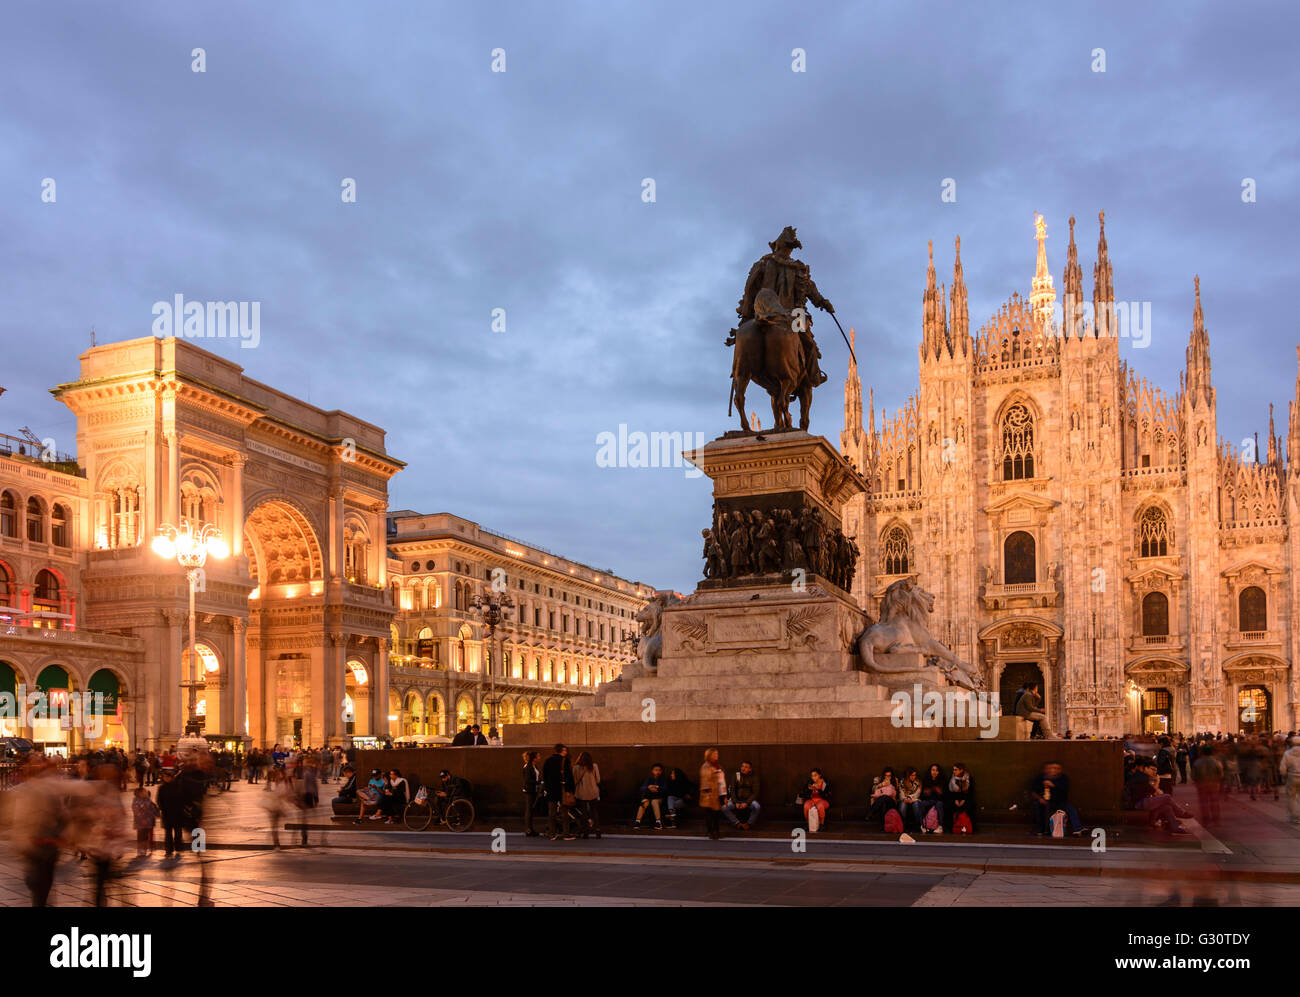 Piazza del Duomo with triumphal arch at the entrance to the Galleria Vittorio Emanuele II , Cathedral and equestrian statue of V Stock Photo